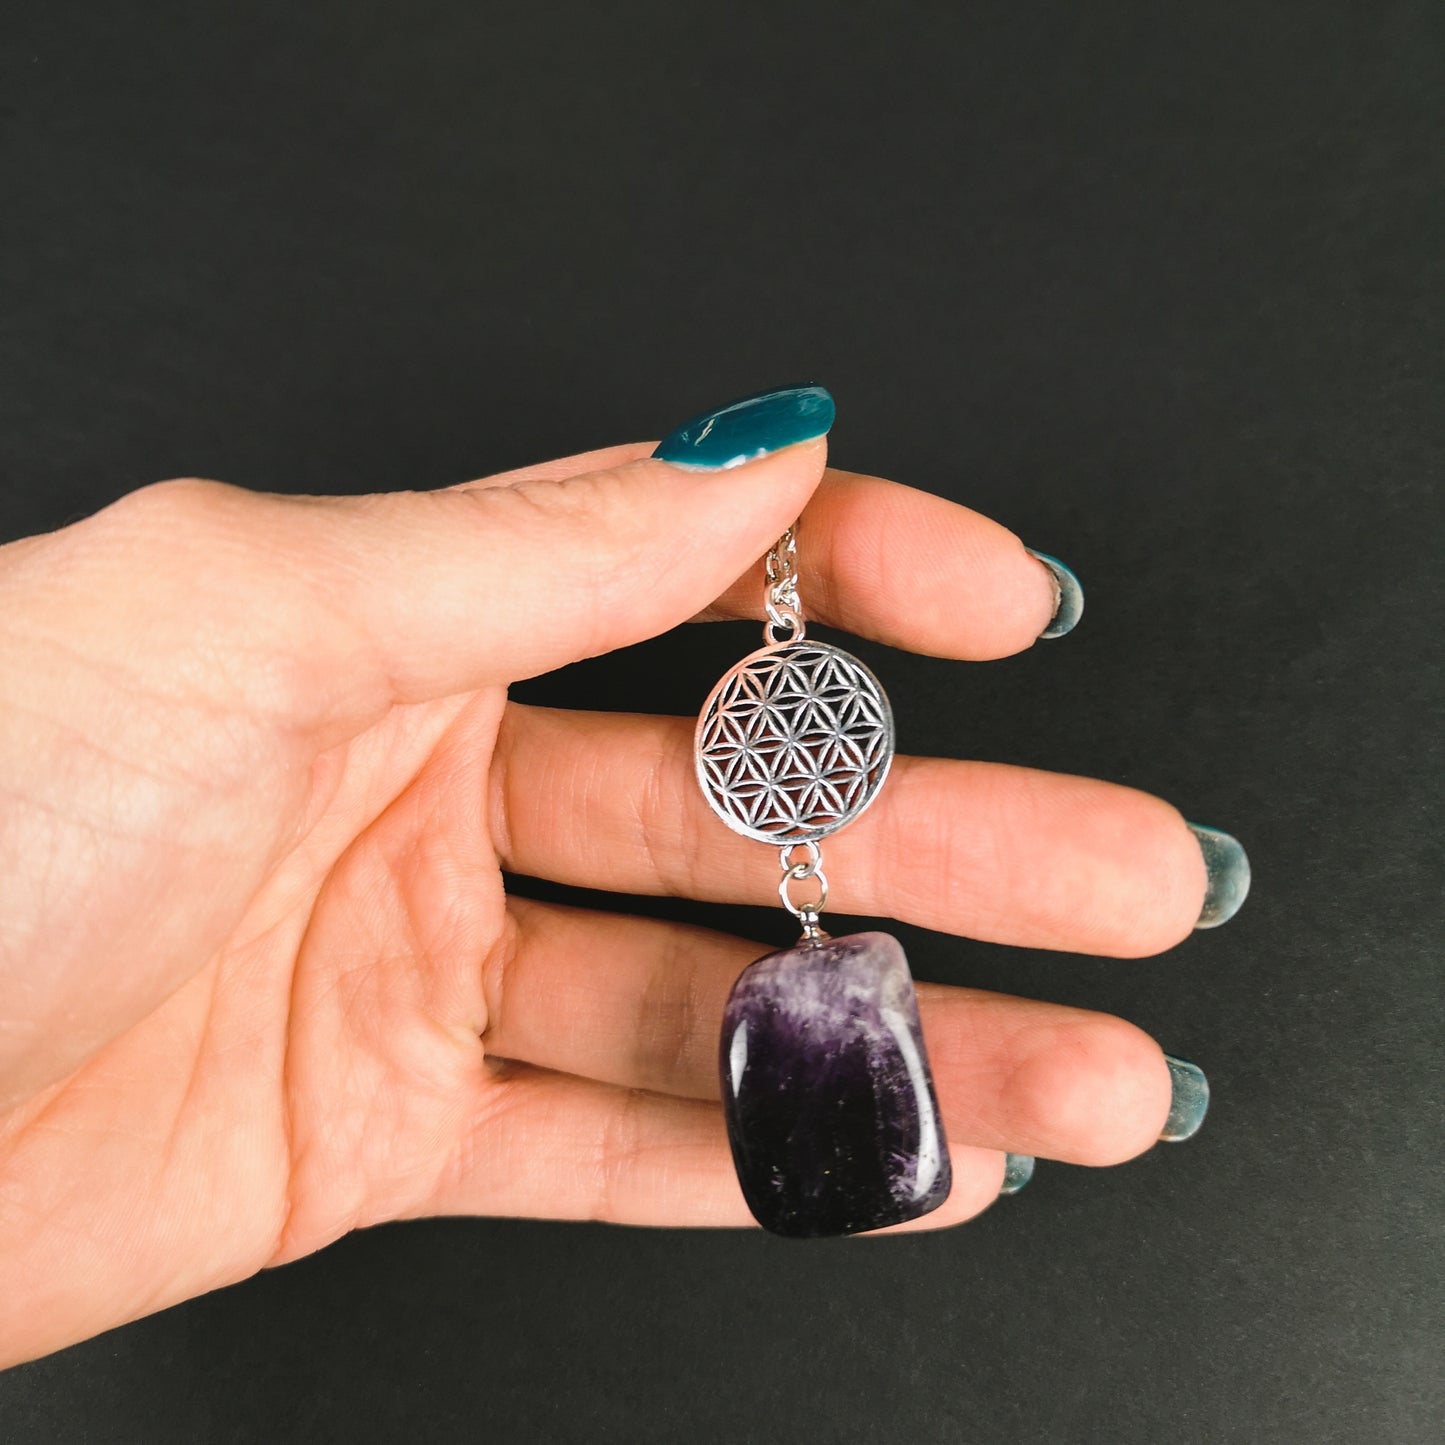 Flower of life and amethyst gemstone spiritual necklace Baguette Magick